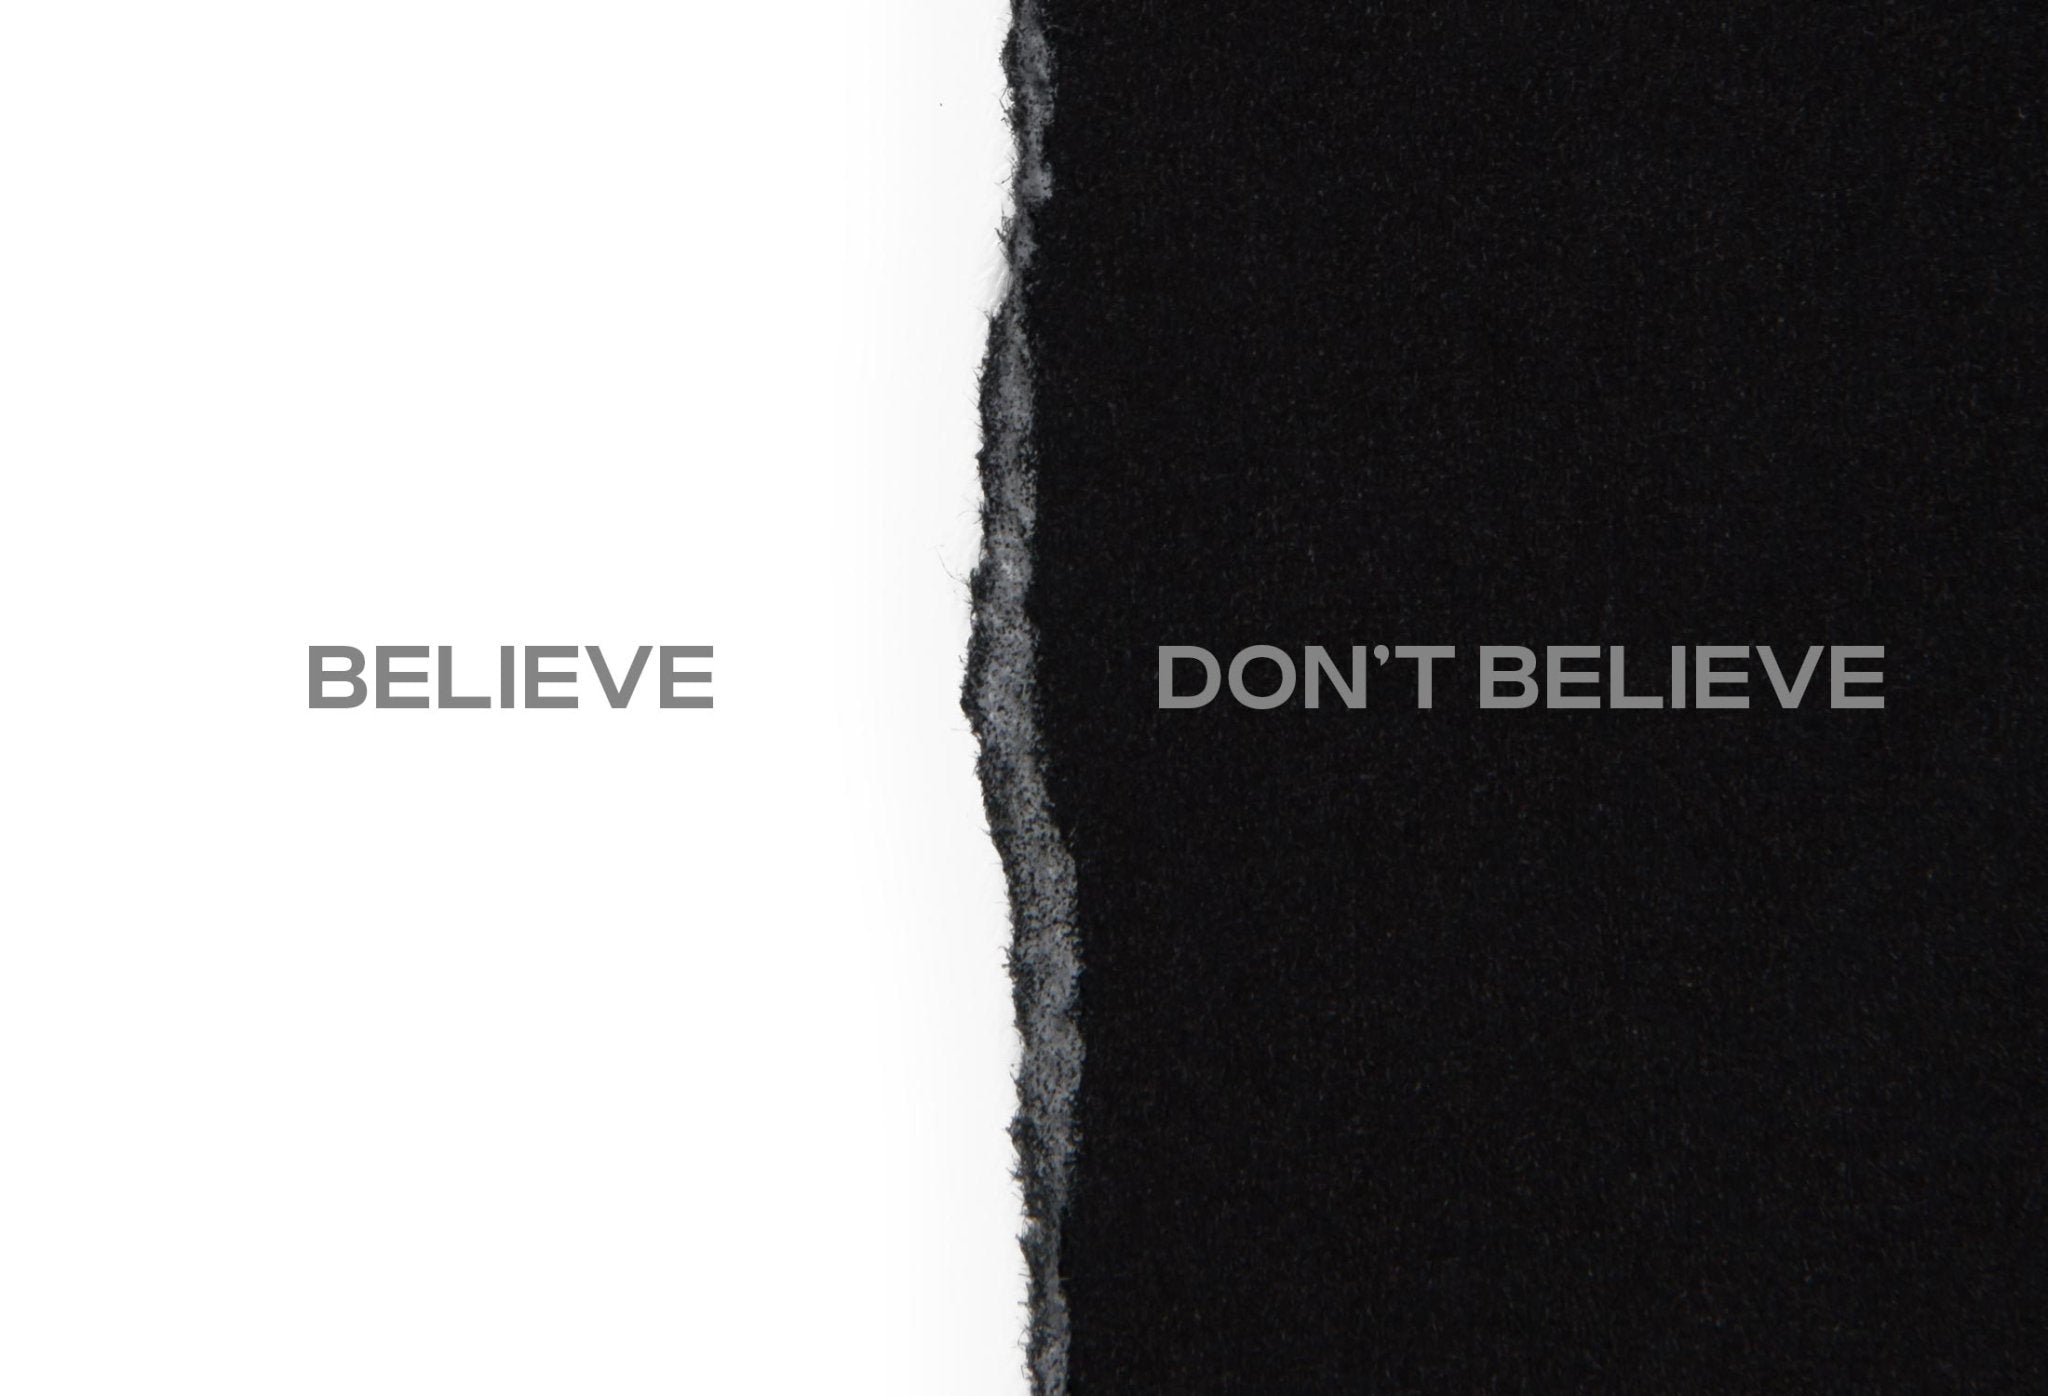 If you believe or don't, you still believe - A Conscious State